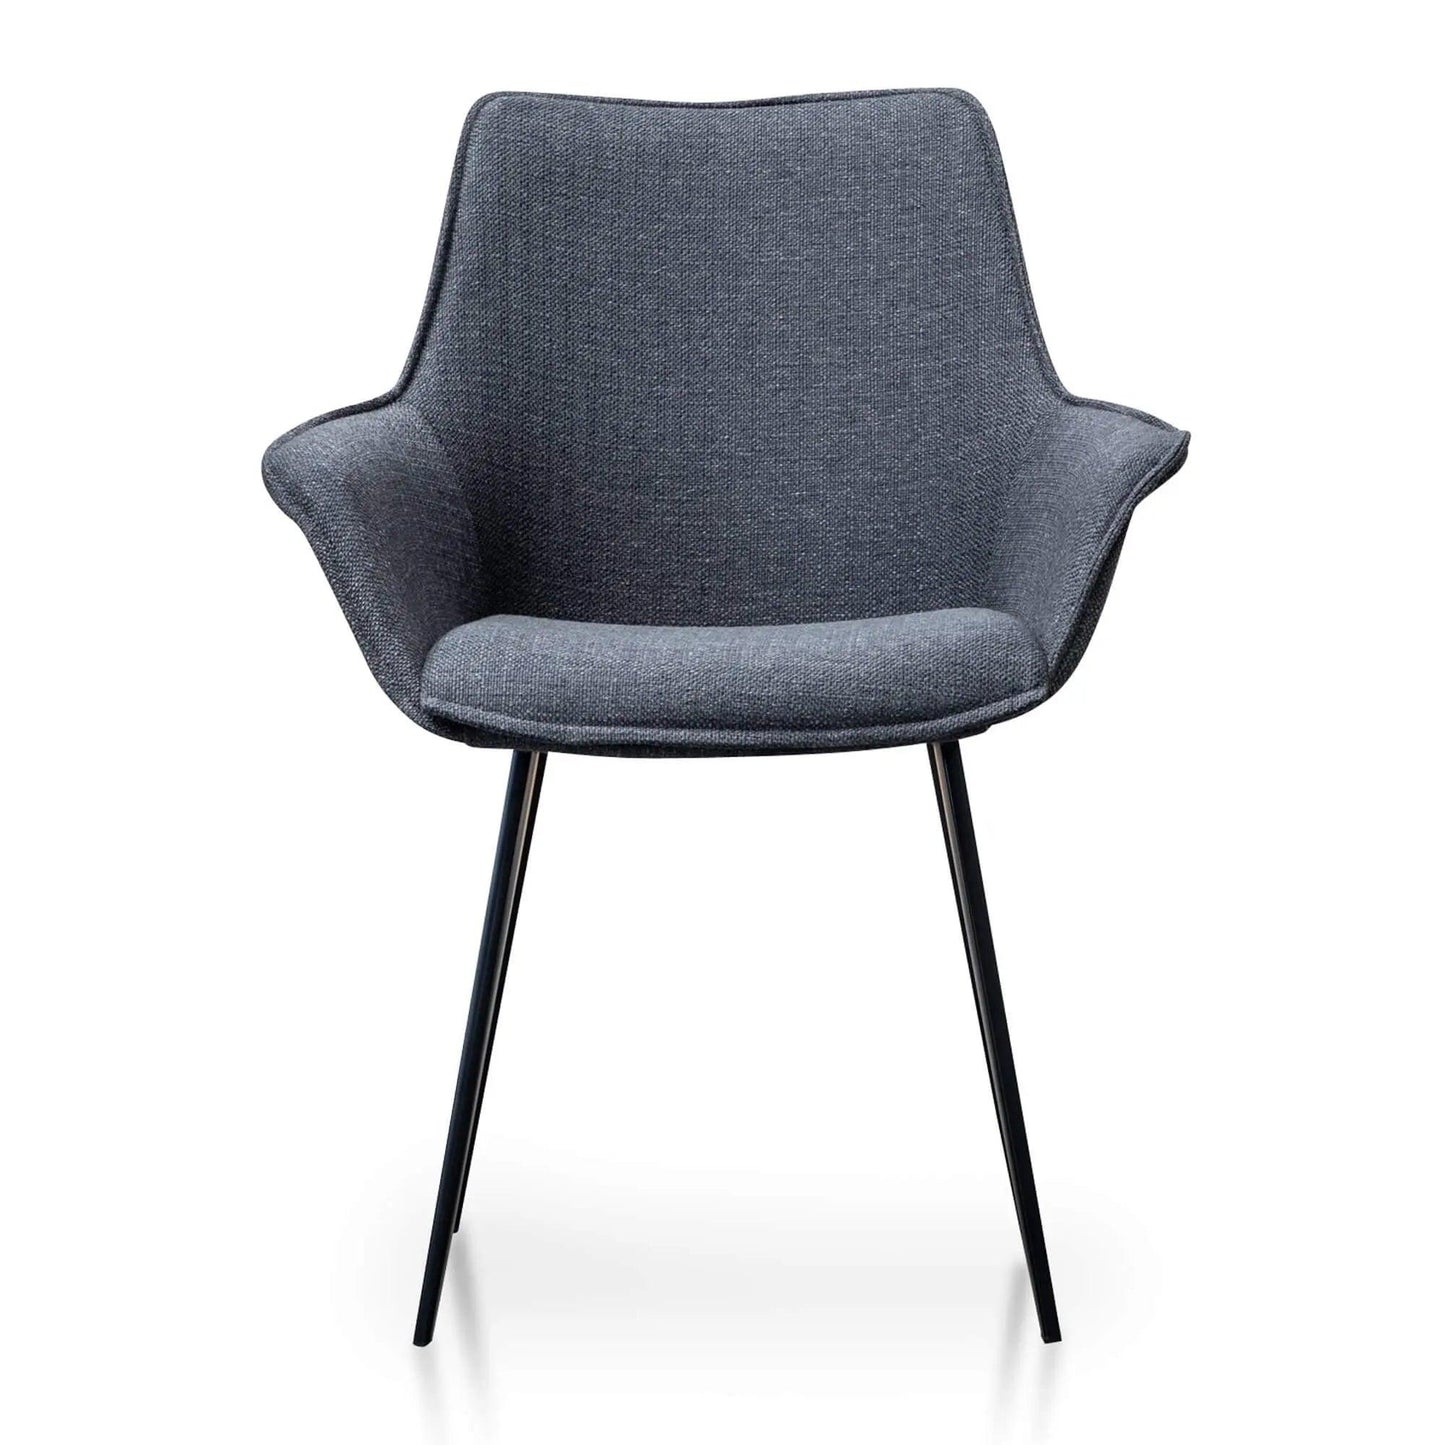 Calibre Dining Chair - Charcoal Grey (Set of 2) DC2633-SEx2 - Dining ChairsDC2633-SEx2 1